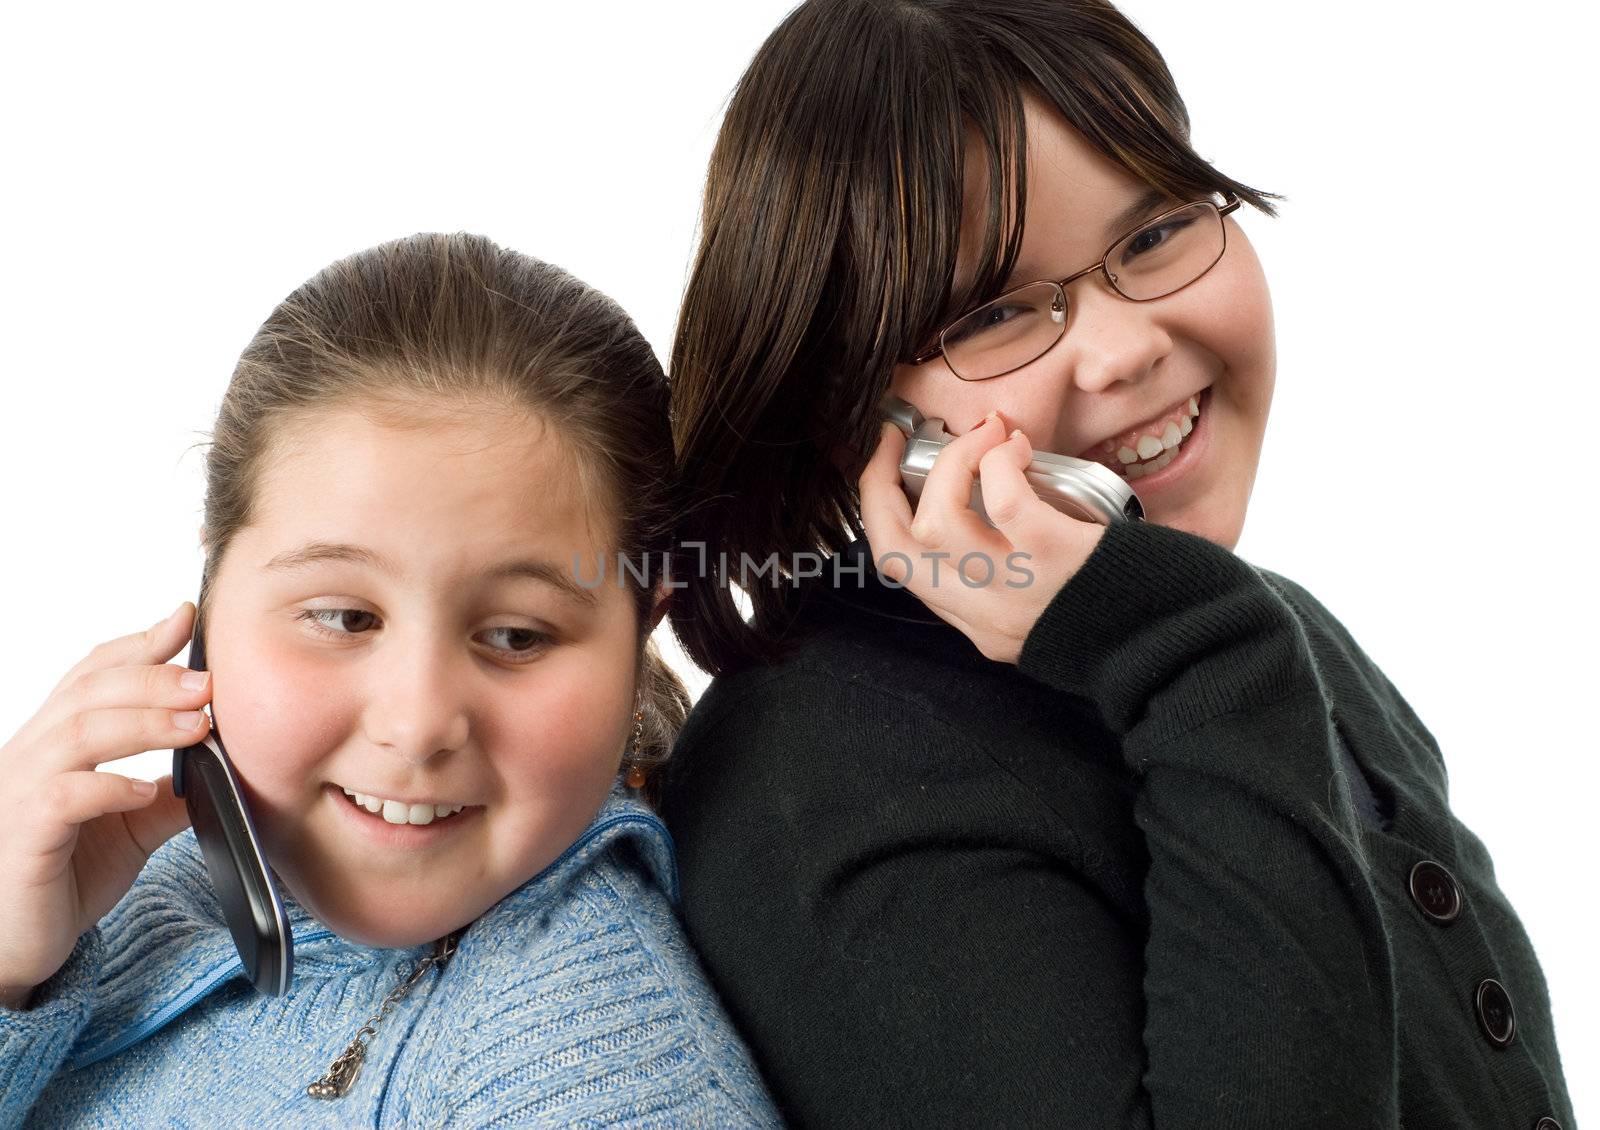 Two girls talking on cell phones, isolated against a white background